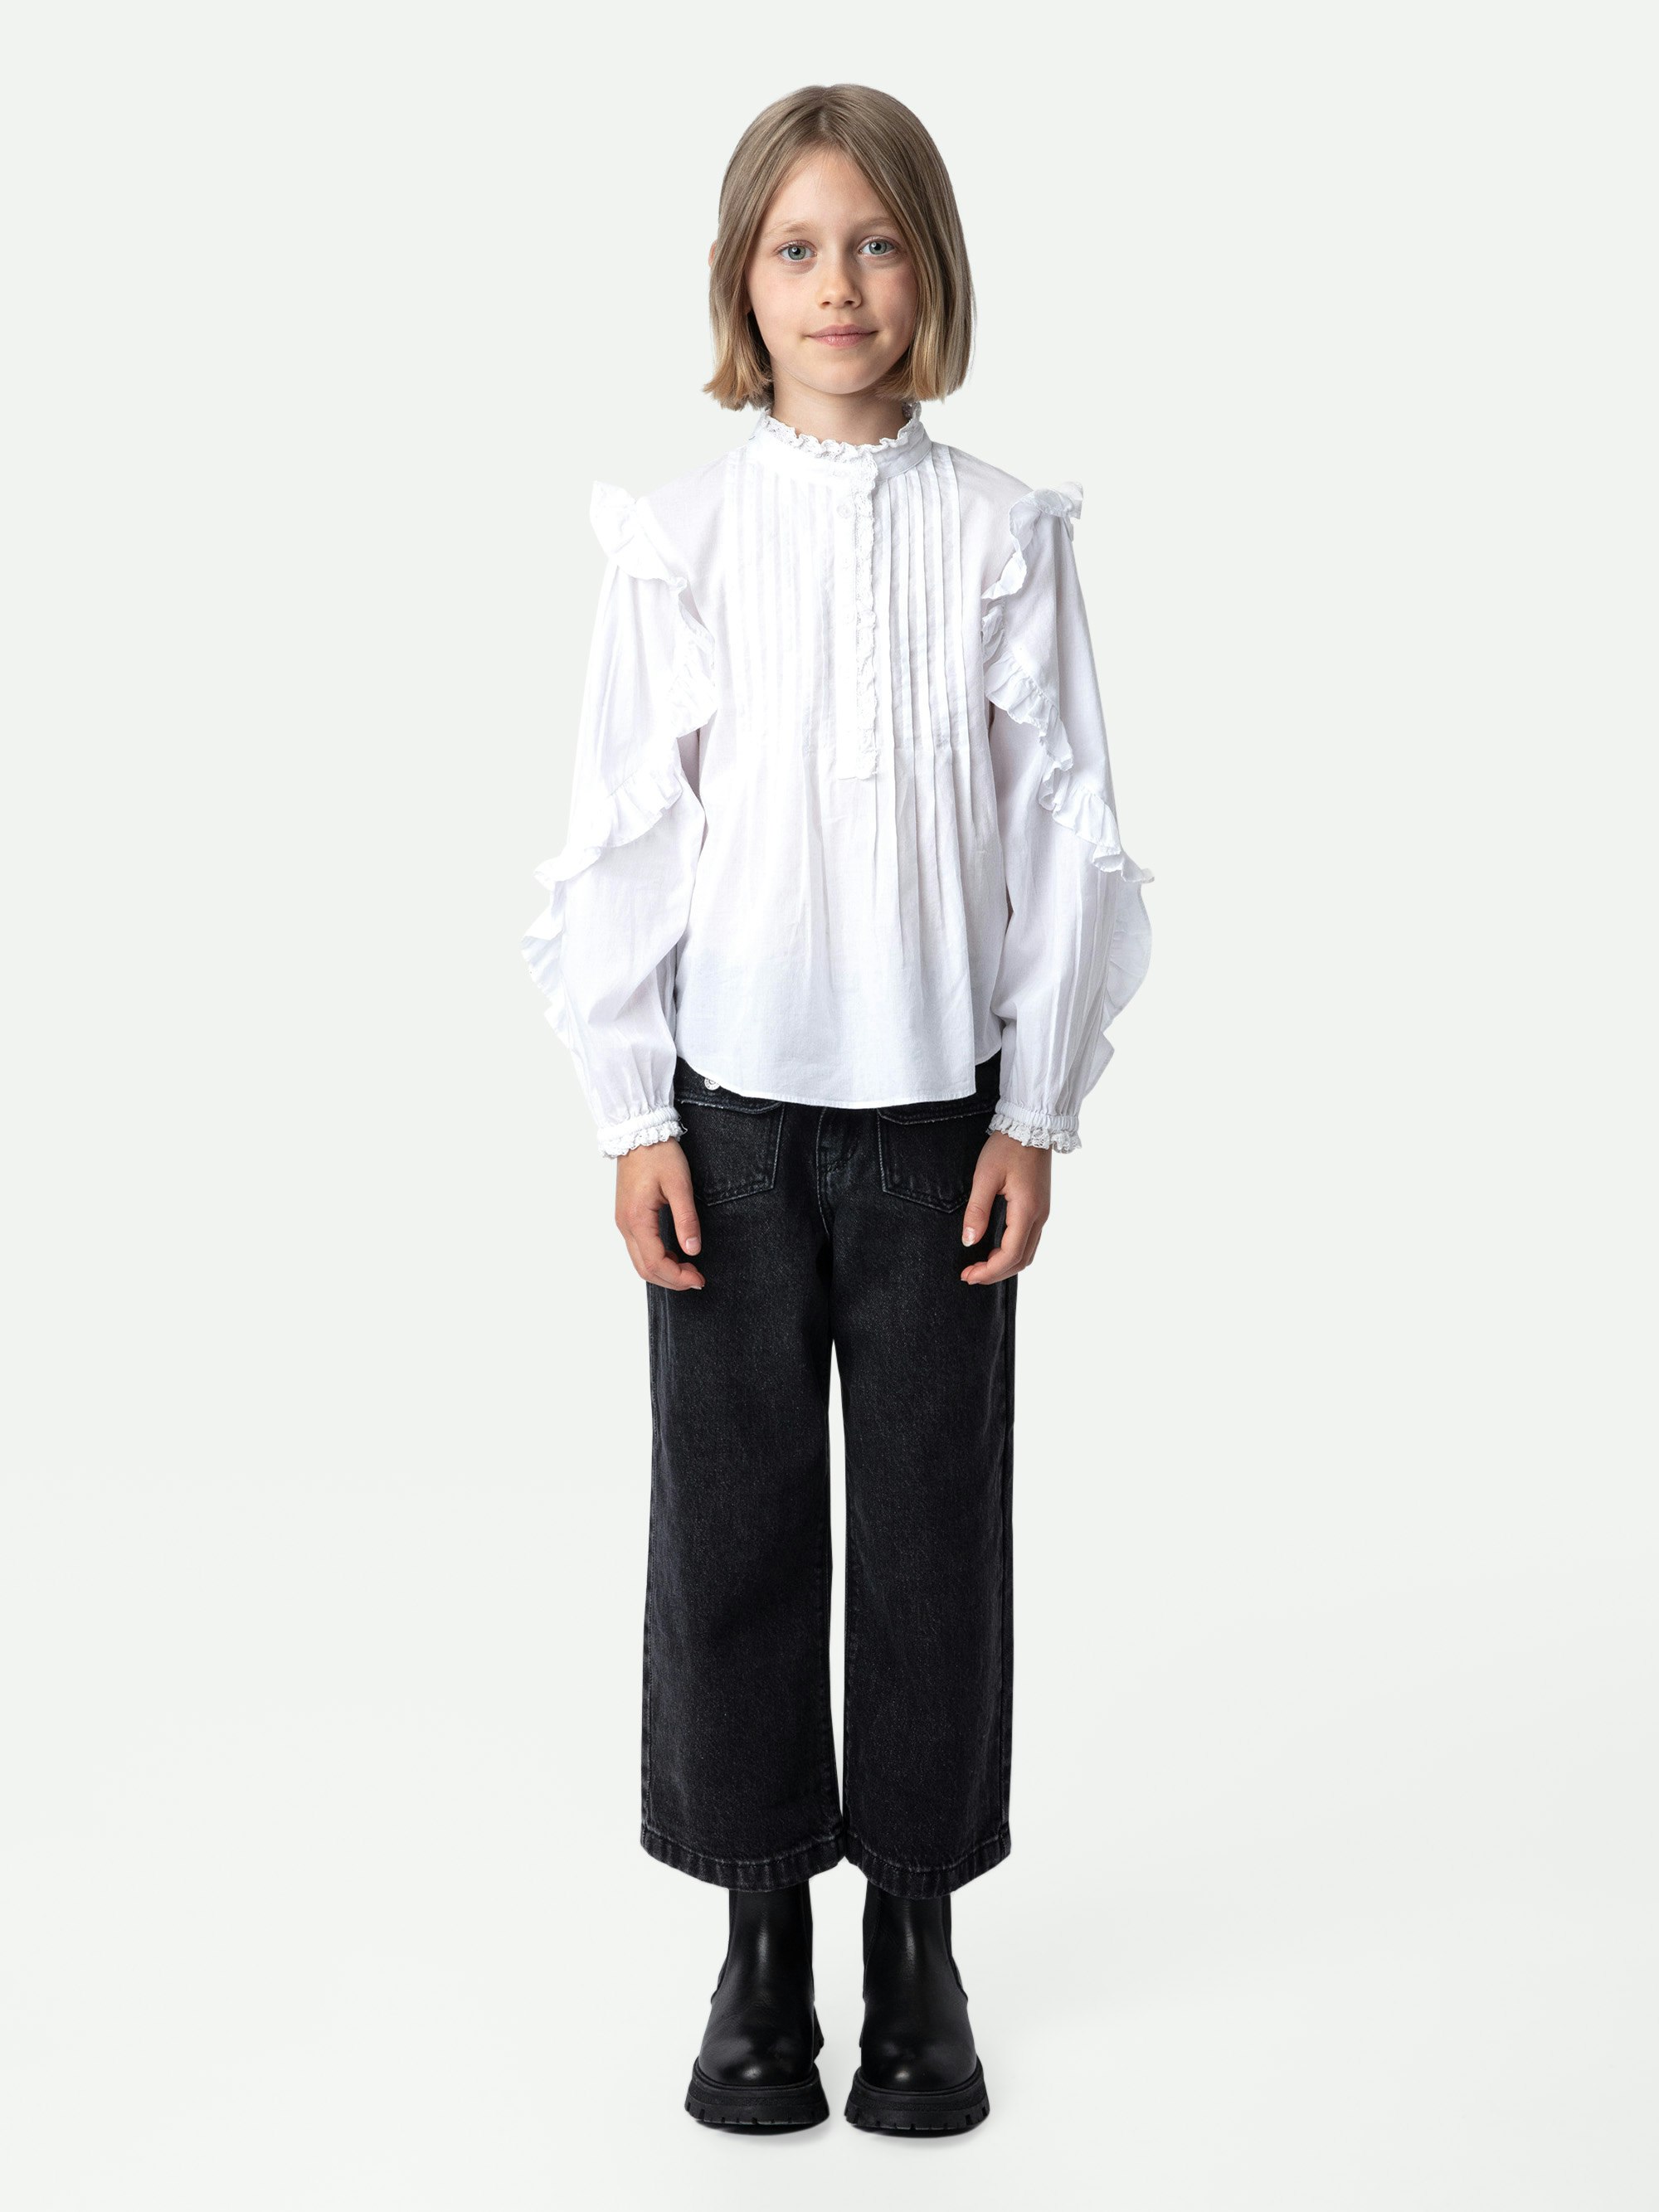 Timmy Girls’ Blouse - Girls’ white cotton voile blouse with ruffles.